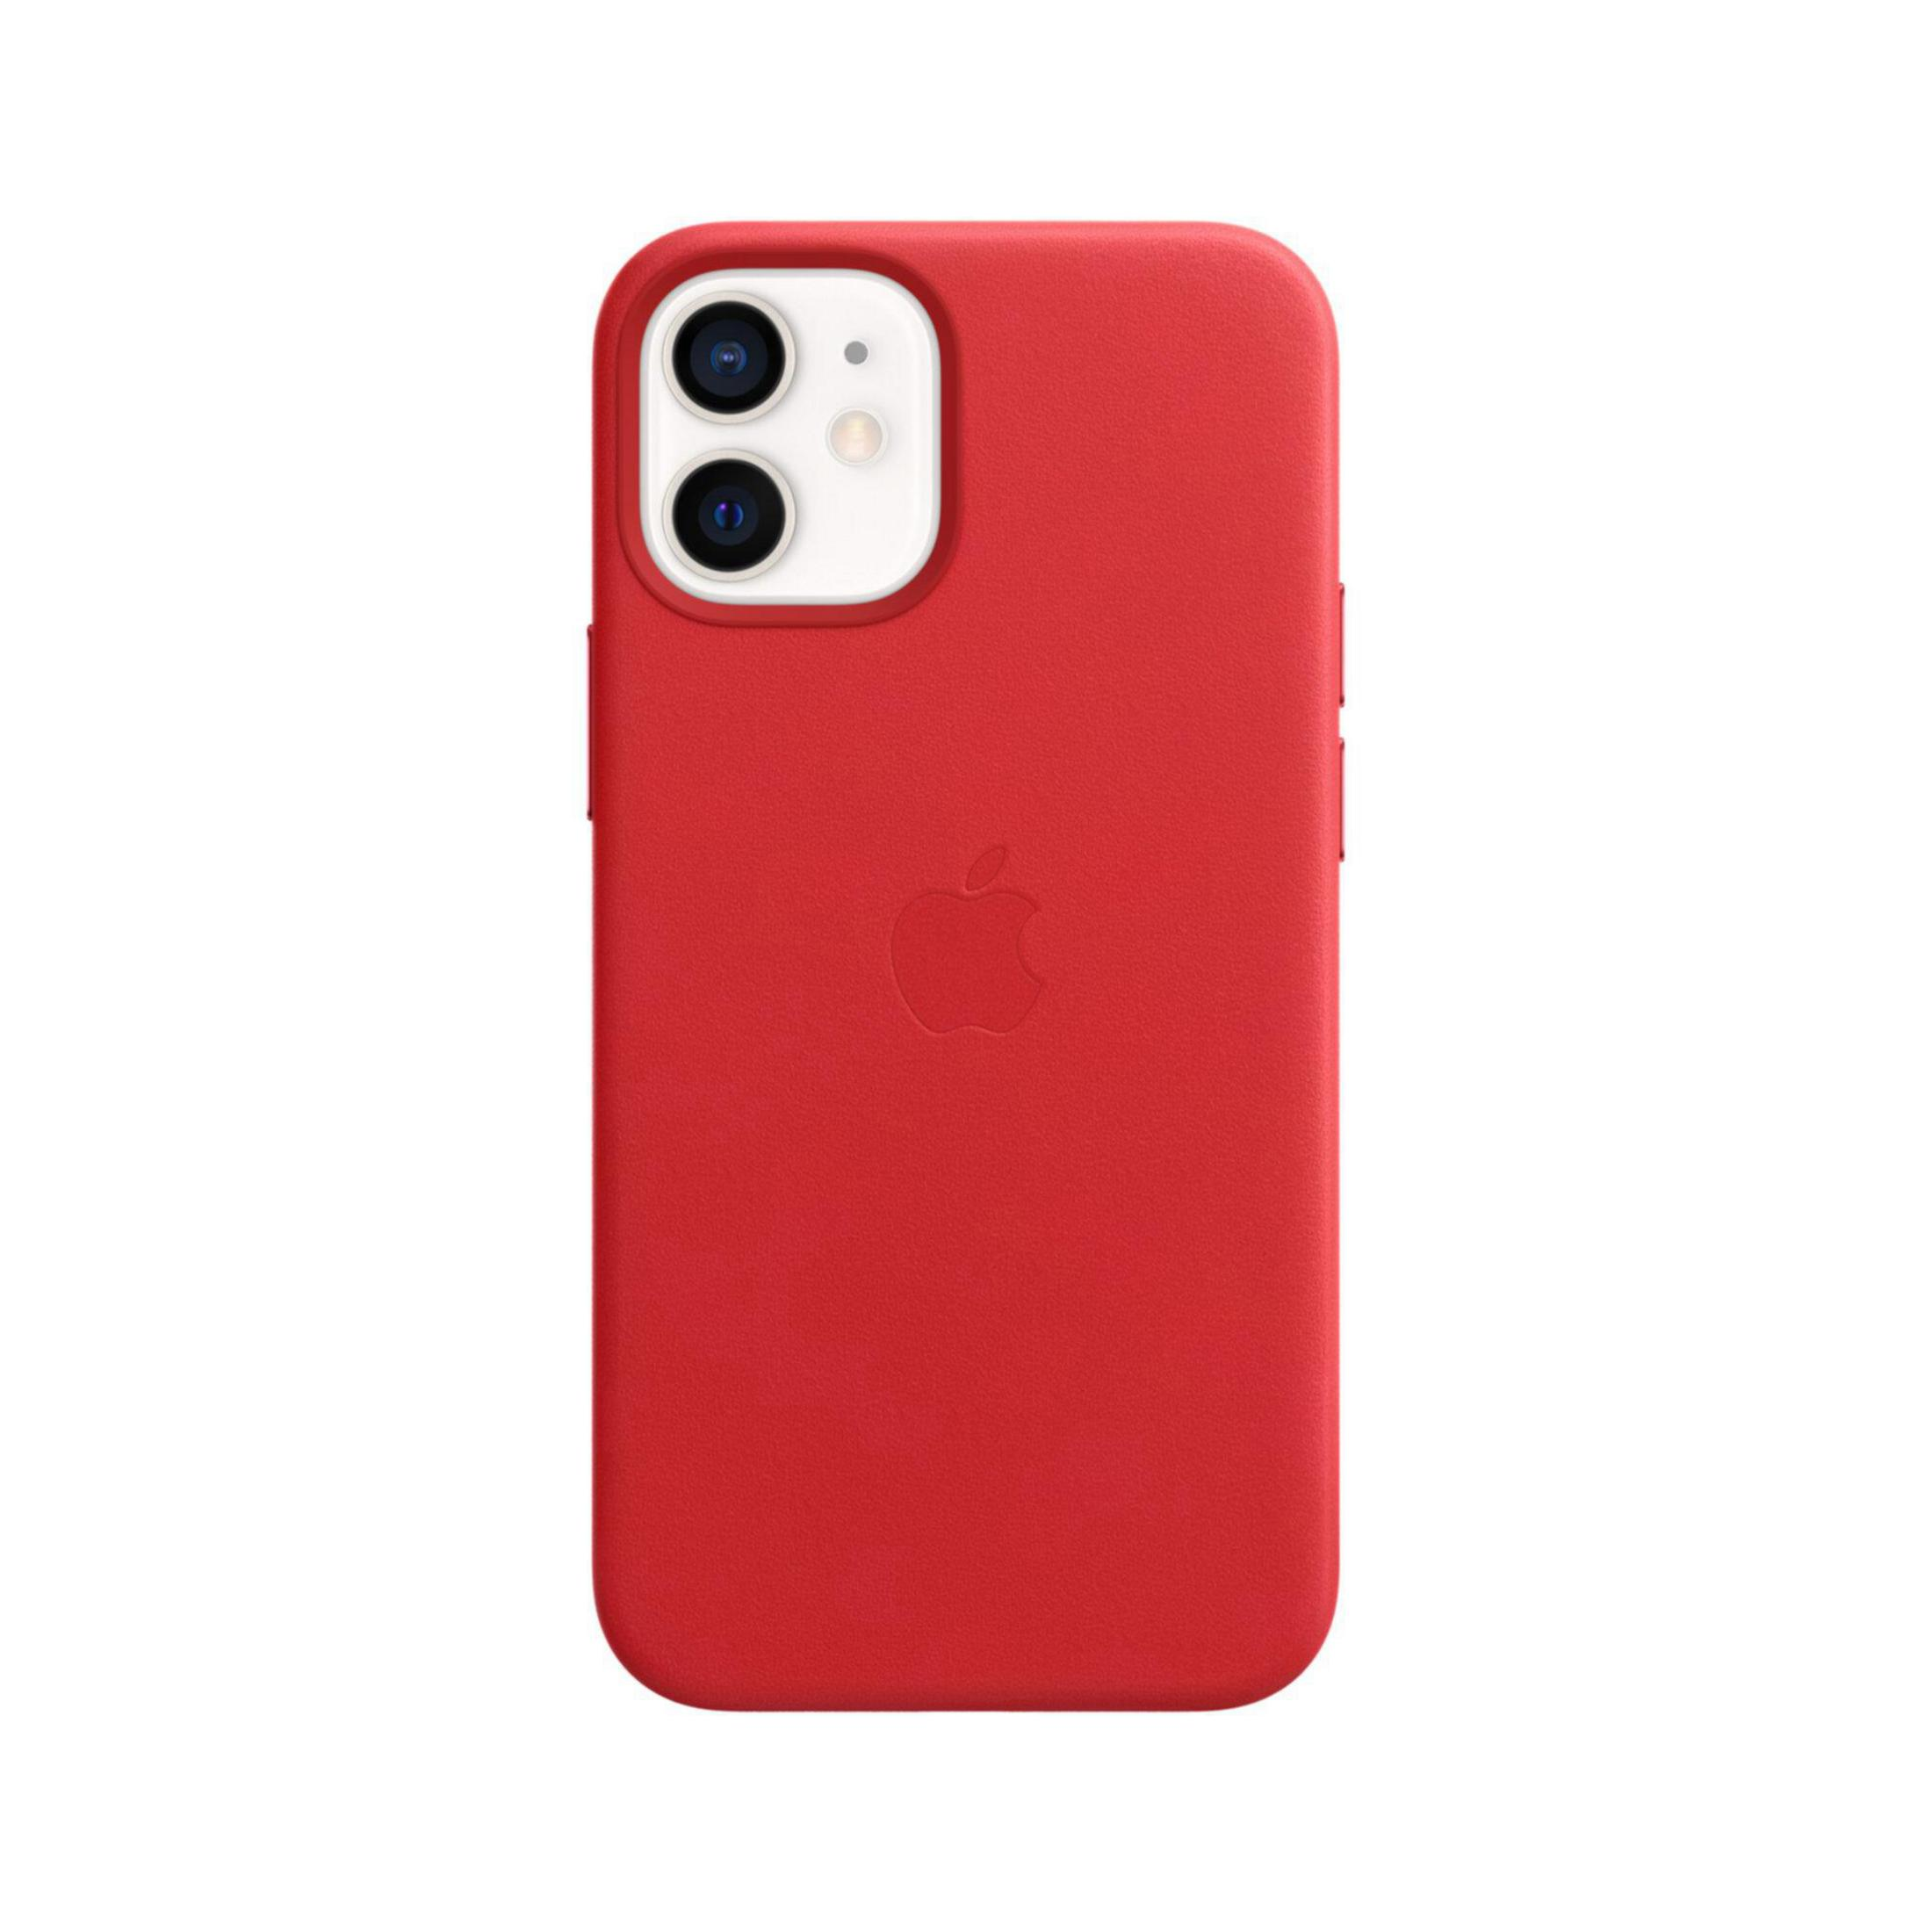 12 IPHONE12MLEDER-(PRODUCT)RED, Apple, APPLE Mini, IPhone Red MHK73ZM/A Backcover,